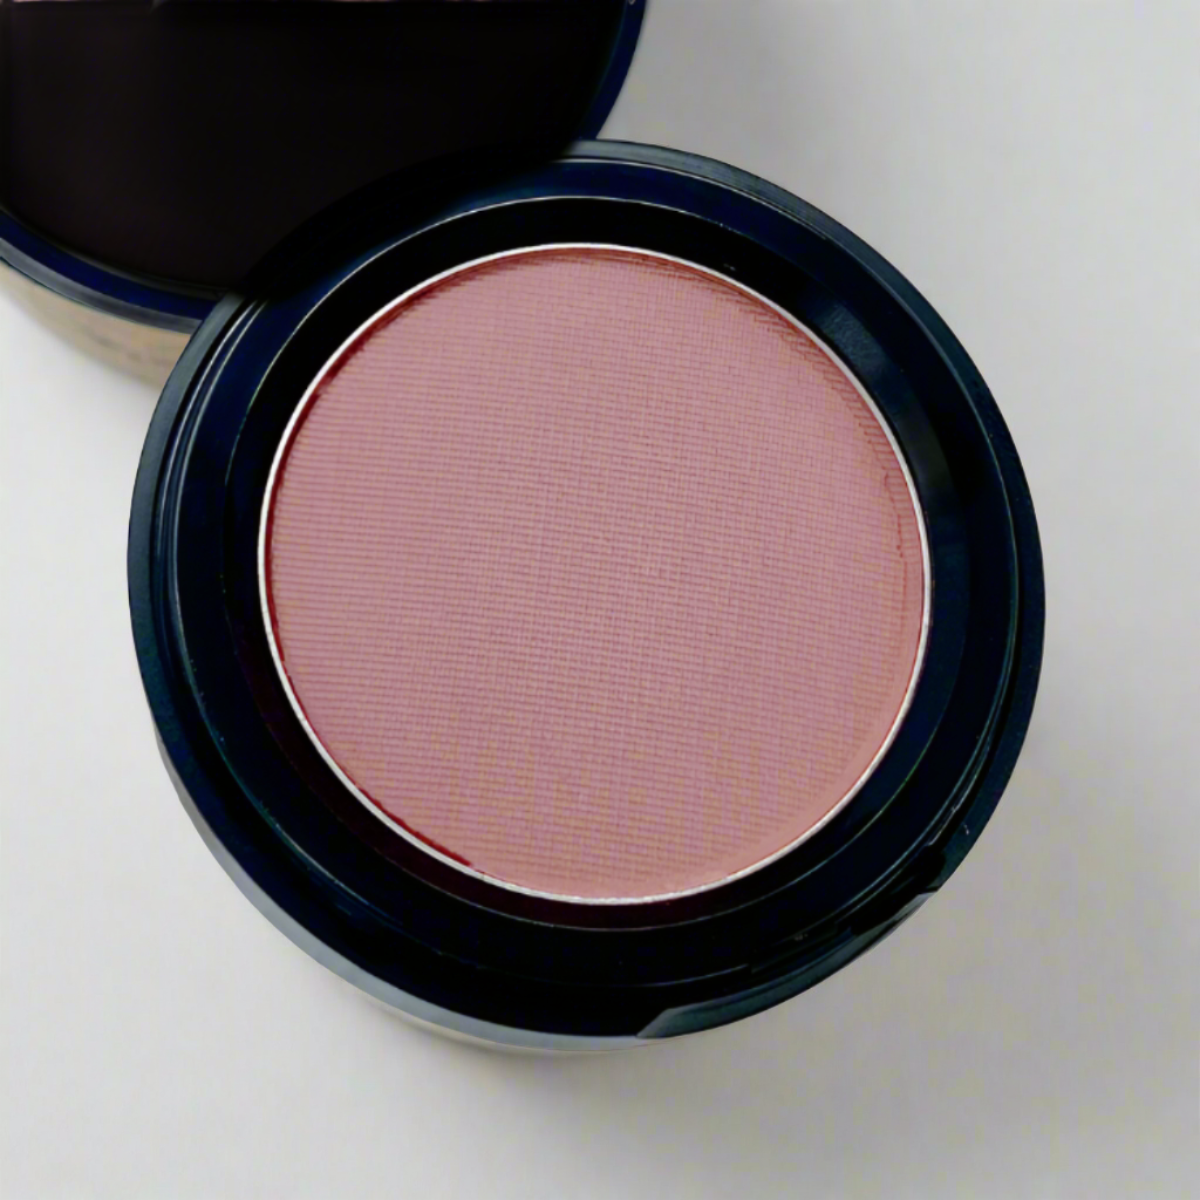 A light mauve pink matte pressed blush in a cosmetic container